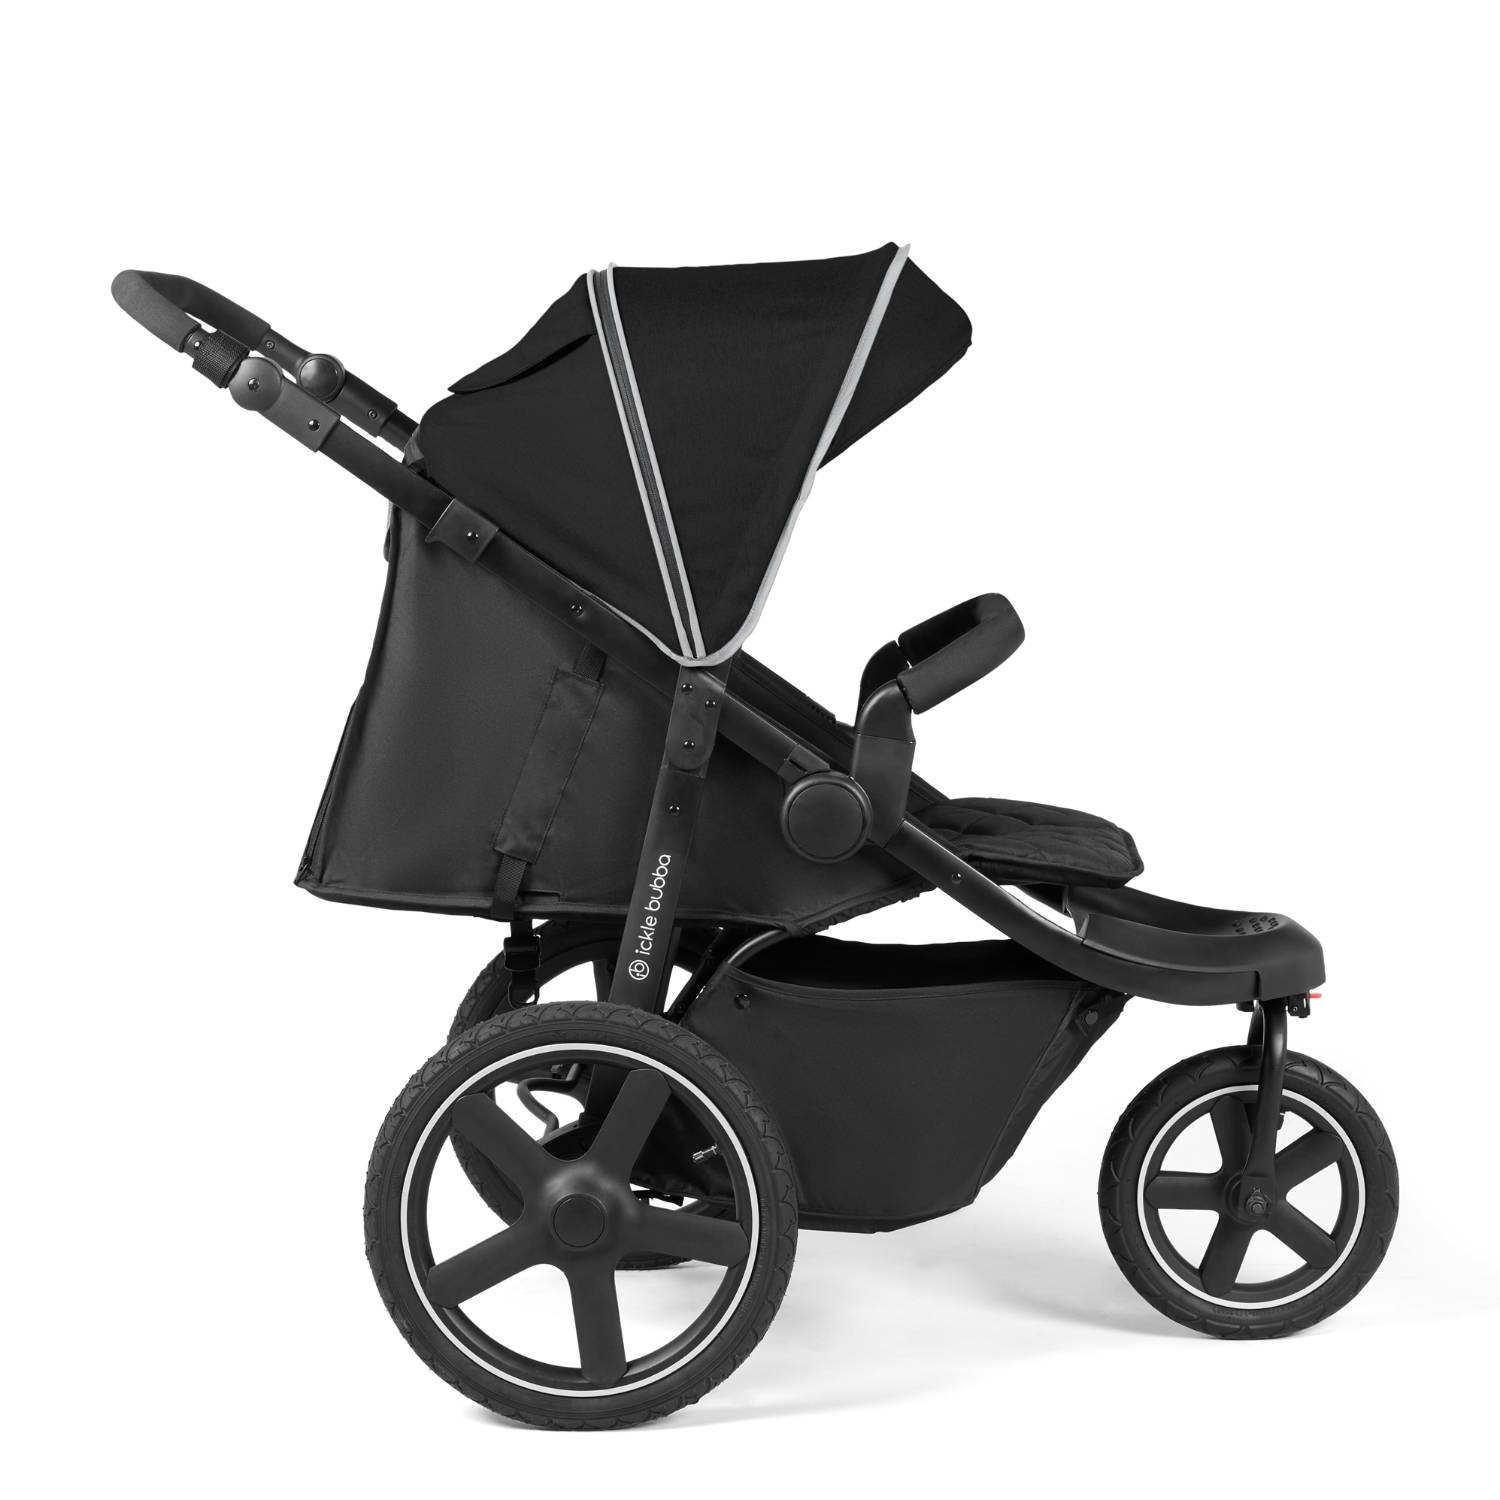 Ickle Bubba Venus Prime Jogger Stroller in Black colour in reclined position